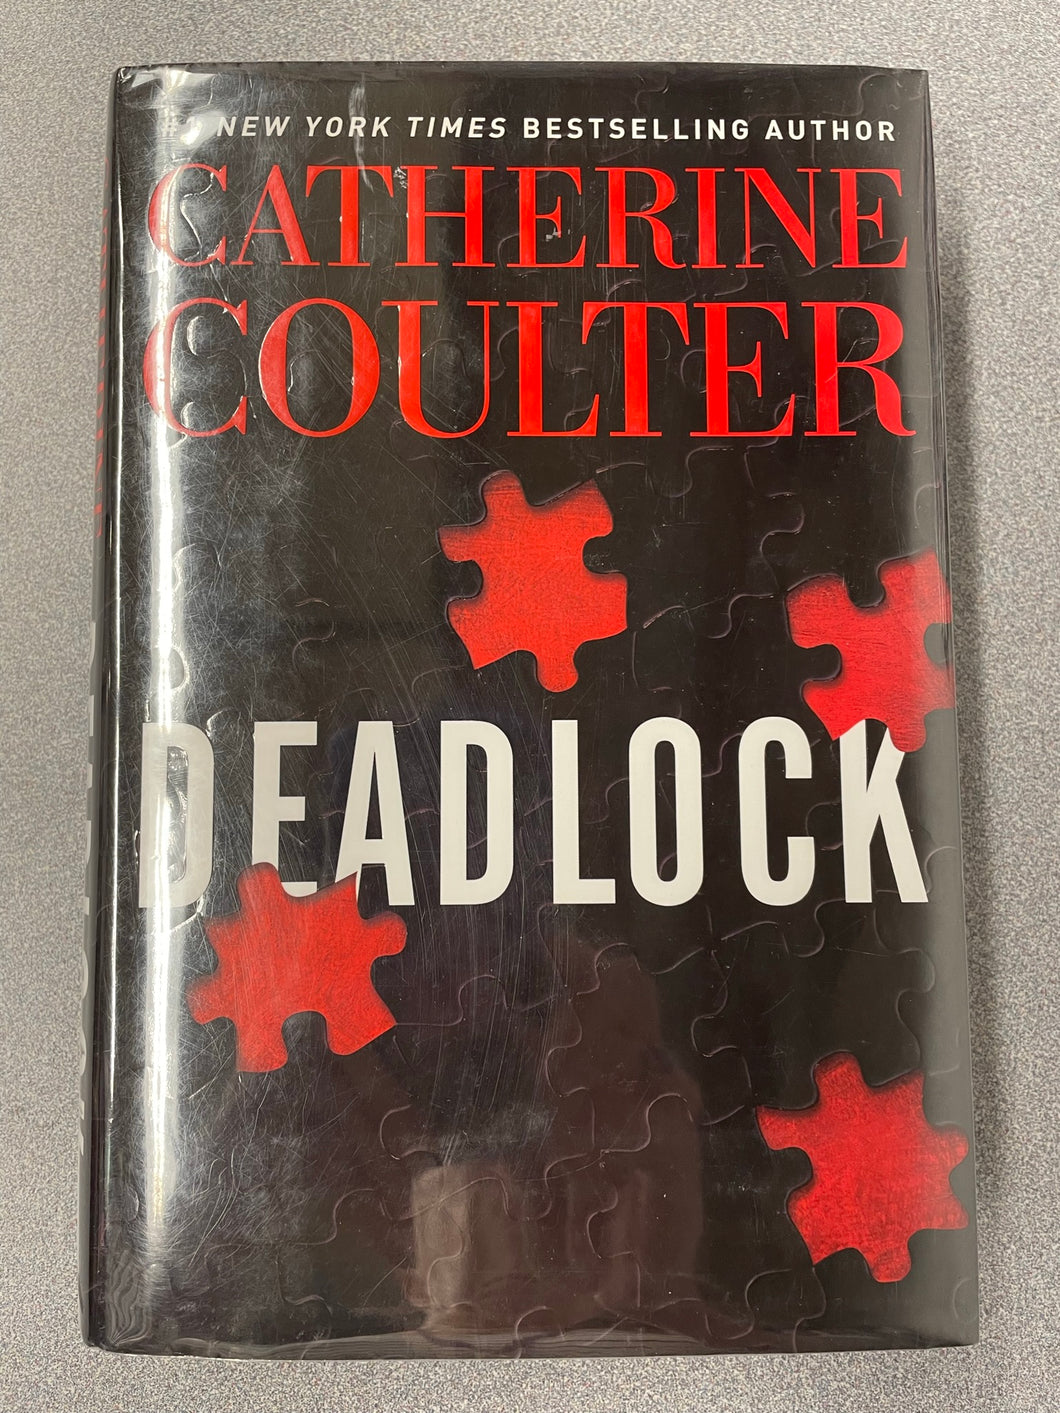 Coulter, Catherine, Deadlock [2020] MY 6/23